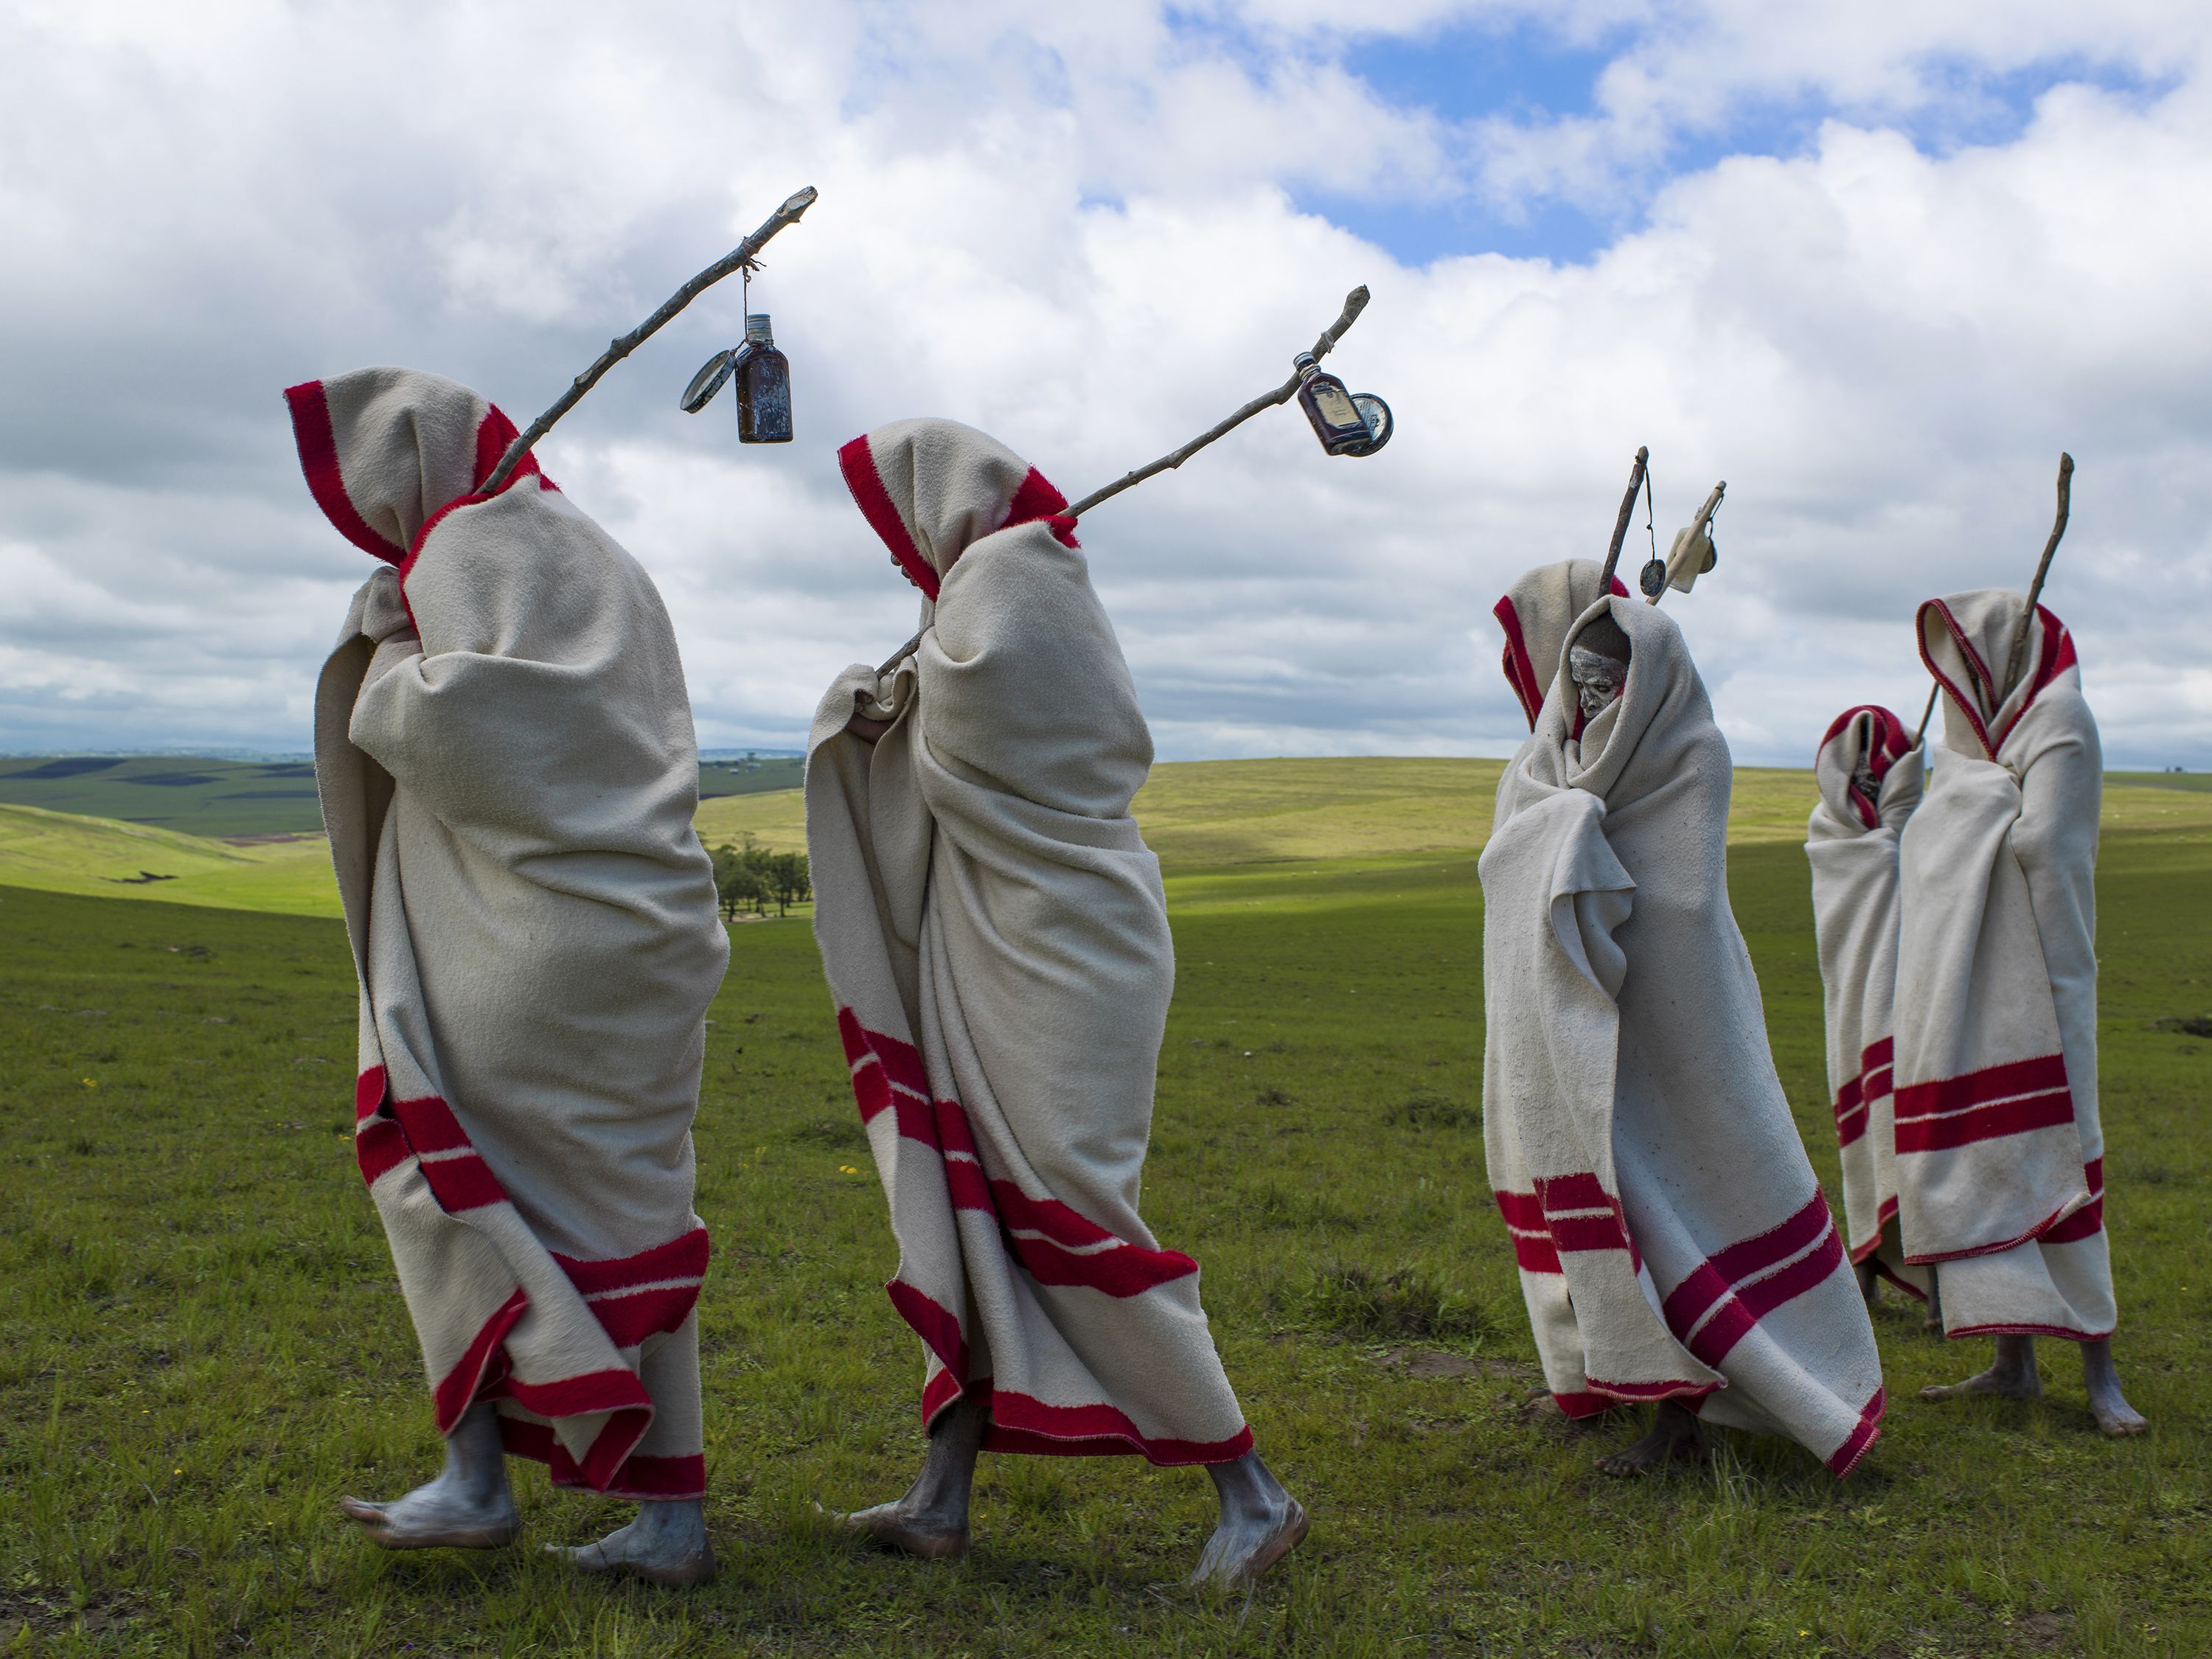 xhosa tribe south africa culture